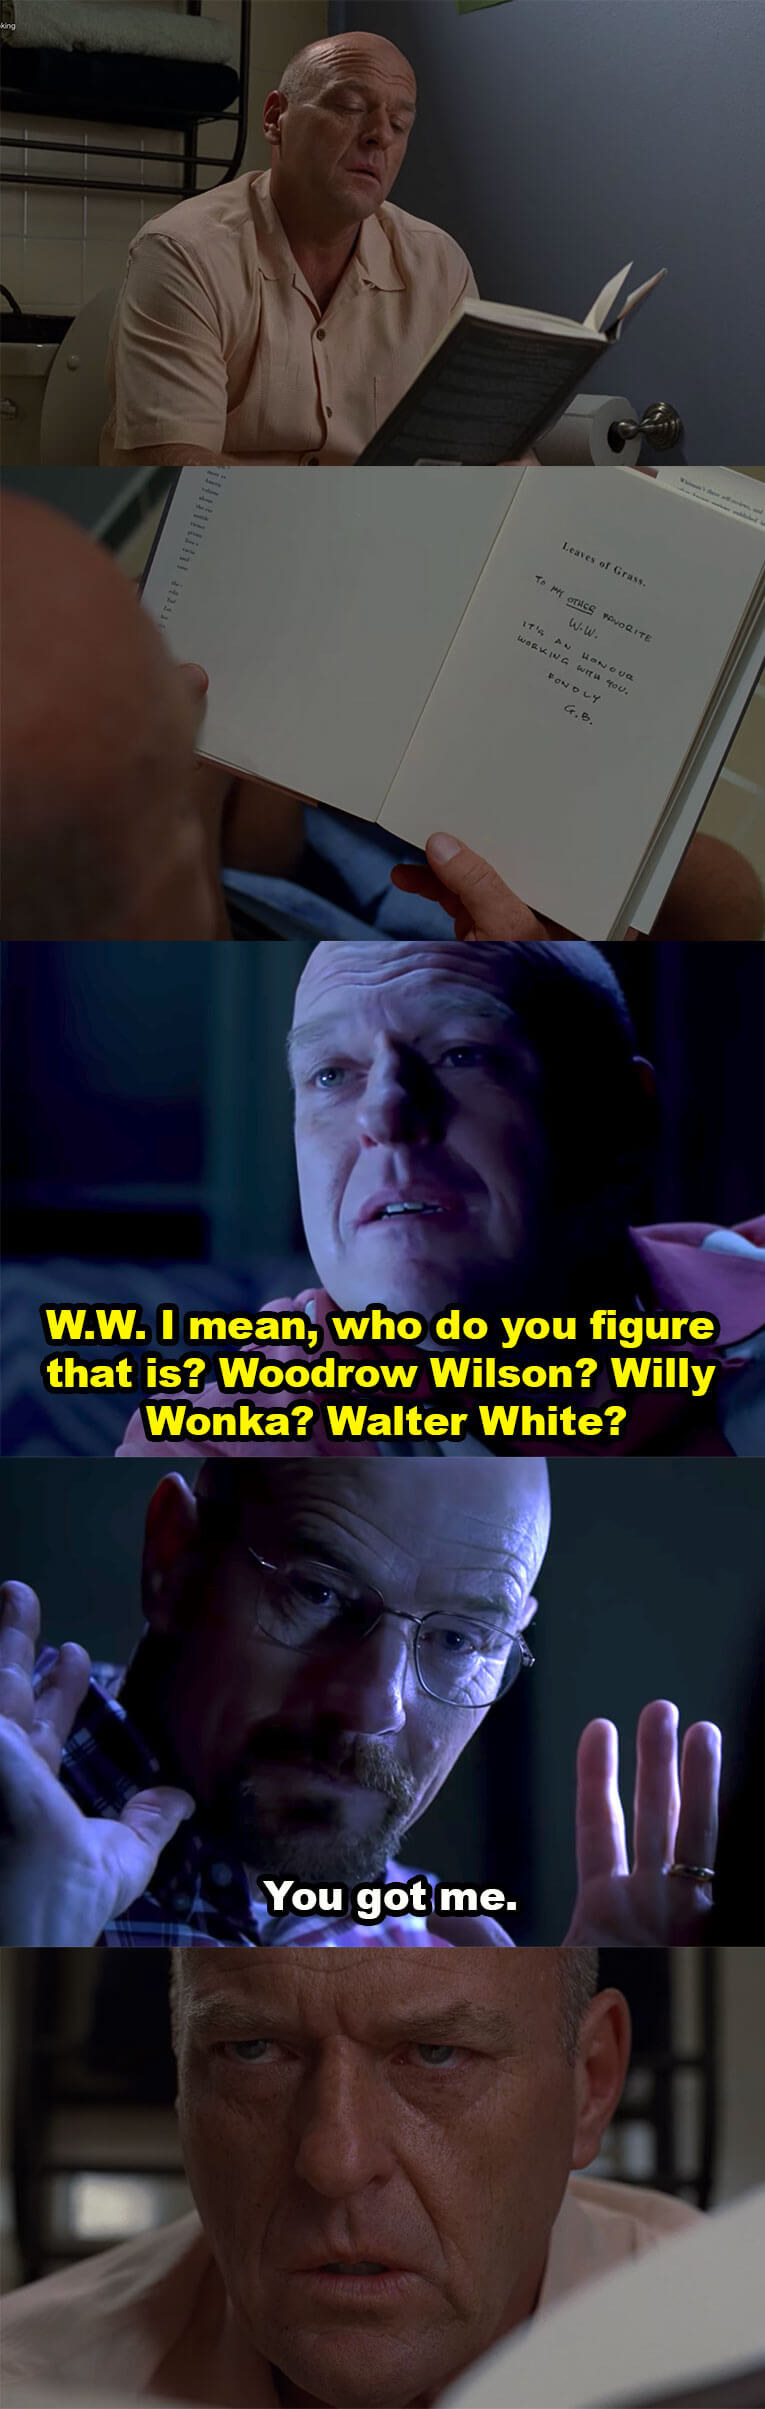 Hank sees an inscription from GB in the book and flashes back to talking with Walt about the W.W. inscription, guessing that it stood for Walter White